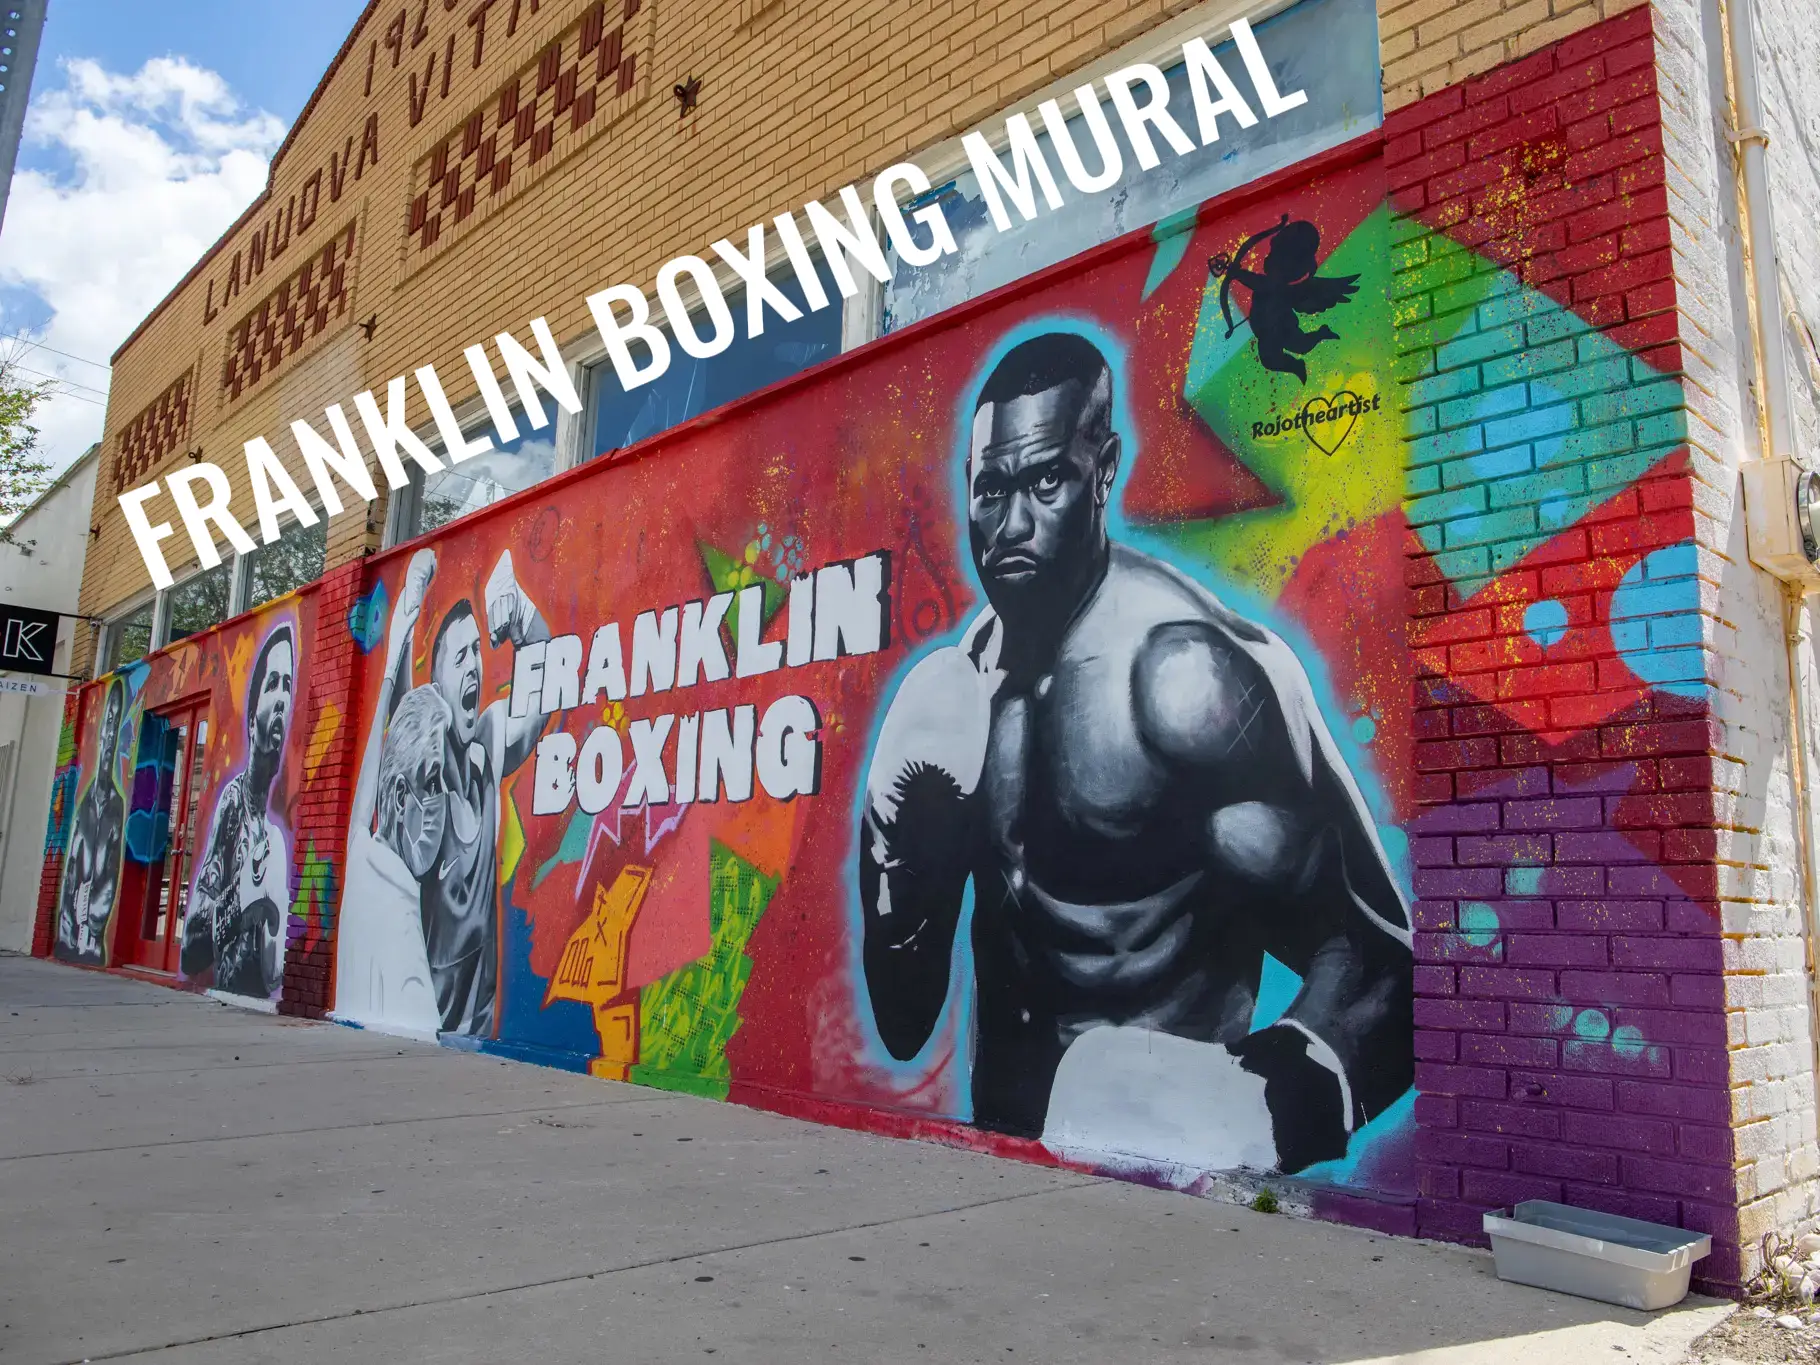 New boxing mural in Tampa Fl “Franklin boxing”, Gallery posted by  Rojotheartist